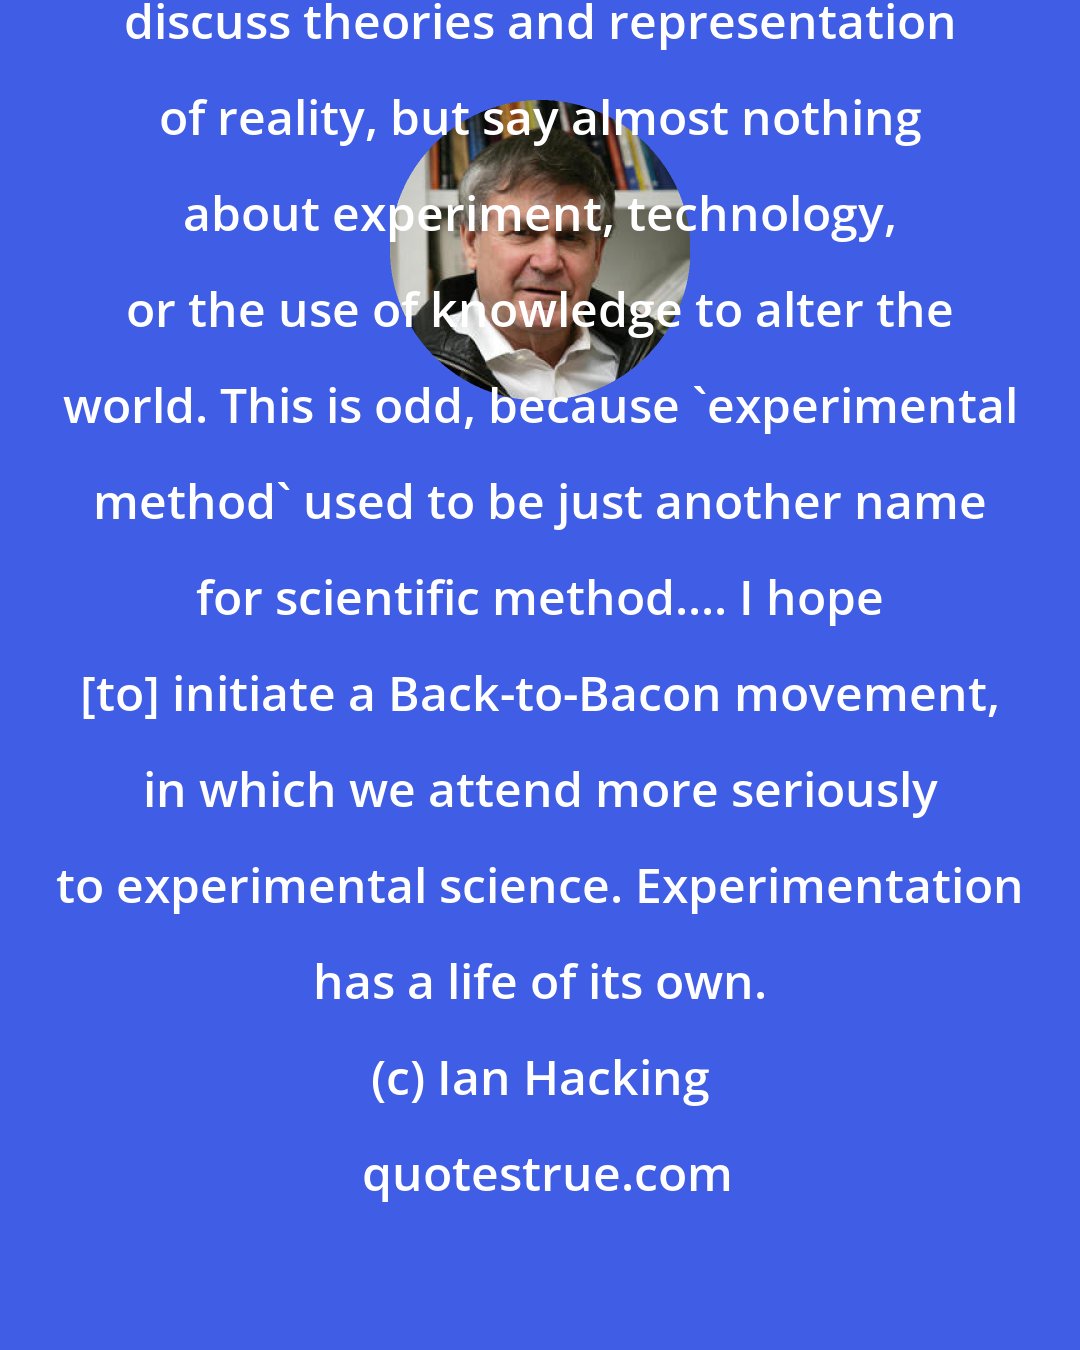 Ian Hacking: Philosophers of science constantly discuss theories and representation of reality, but say almost nothing about experiment, technology, or the use of knowledge to alter the world. This is odd, because 'experimental method' used to be just another name for scientific method.... I hope [to] initiate a Back-to-Bacon movement, in which we attend more seriously to experimental science. Experimentation has a life of its own.